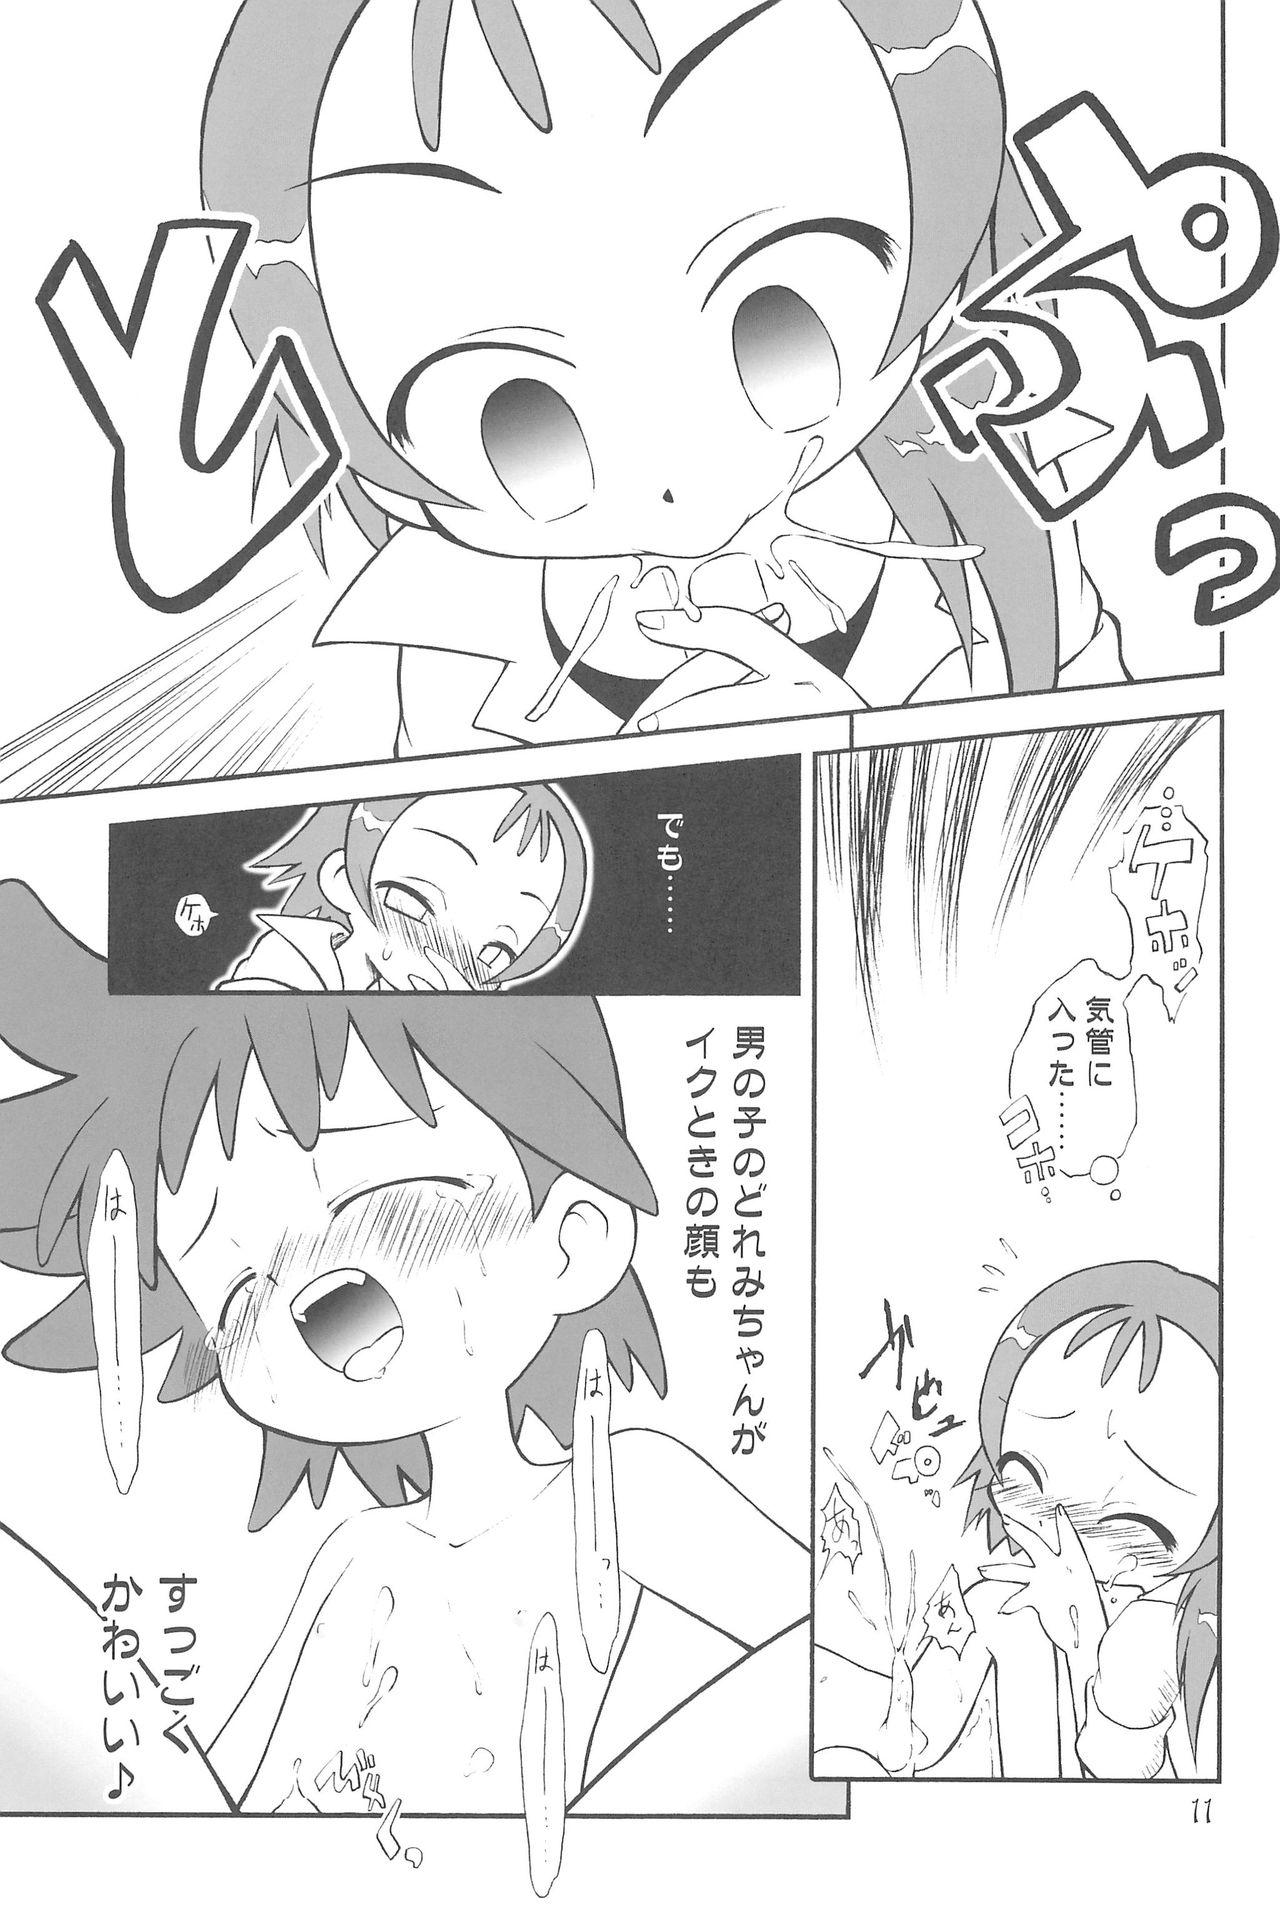 Groupfuck Witch’s Song Plus - Ojamajo doremi Shavedpussy - Page 11